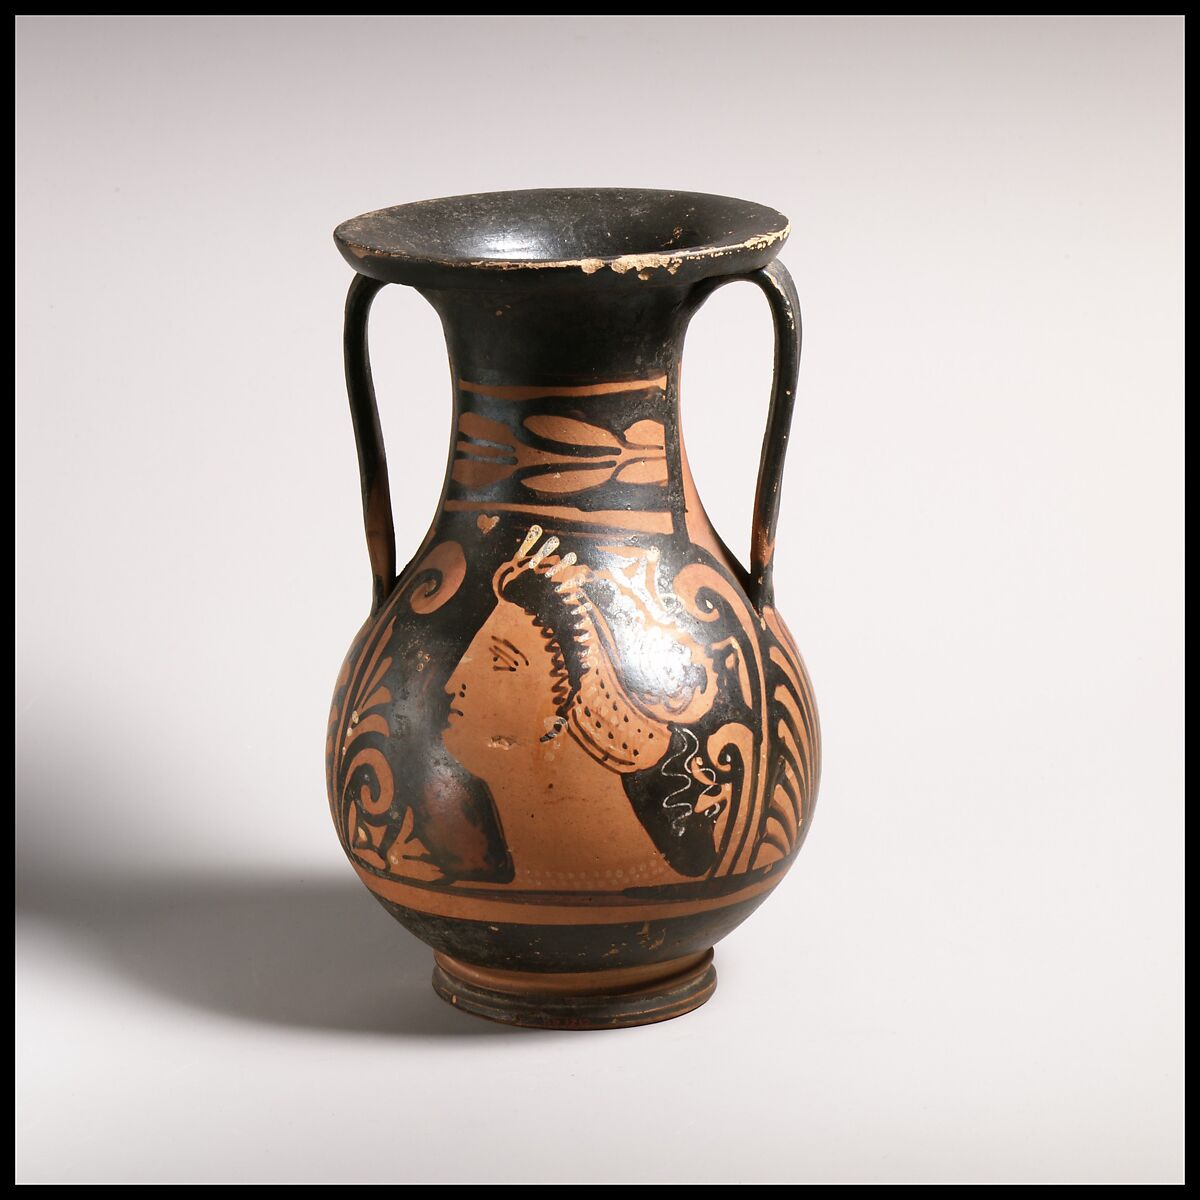 Pelike, Attributed to the Group of Zurich 2661, Terracotta, Greek, South Italian, Apulian 